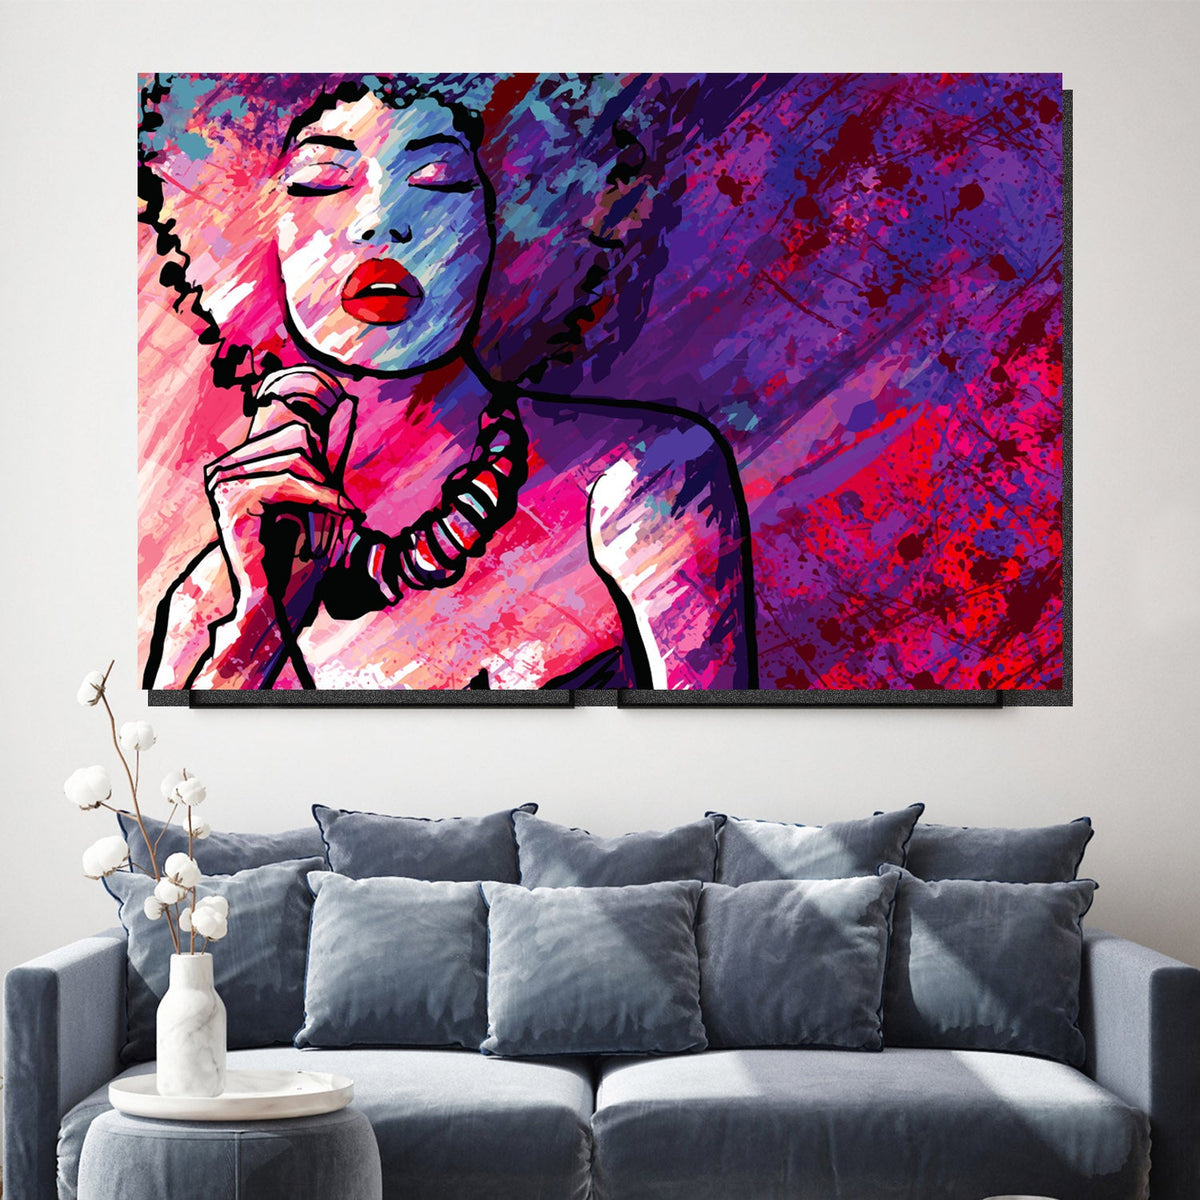 https://cdn.shopify.com/s/files/1/0387/9986/8044/products/JazzSingerCanvasArtprintStretched-4.jpg